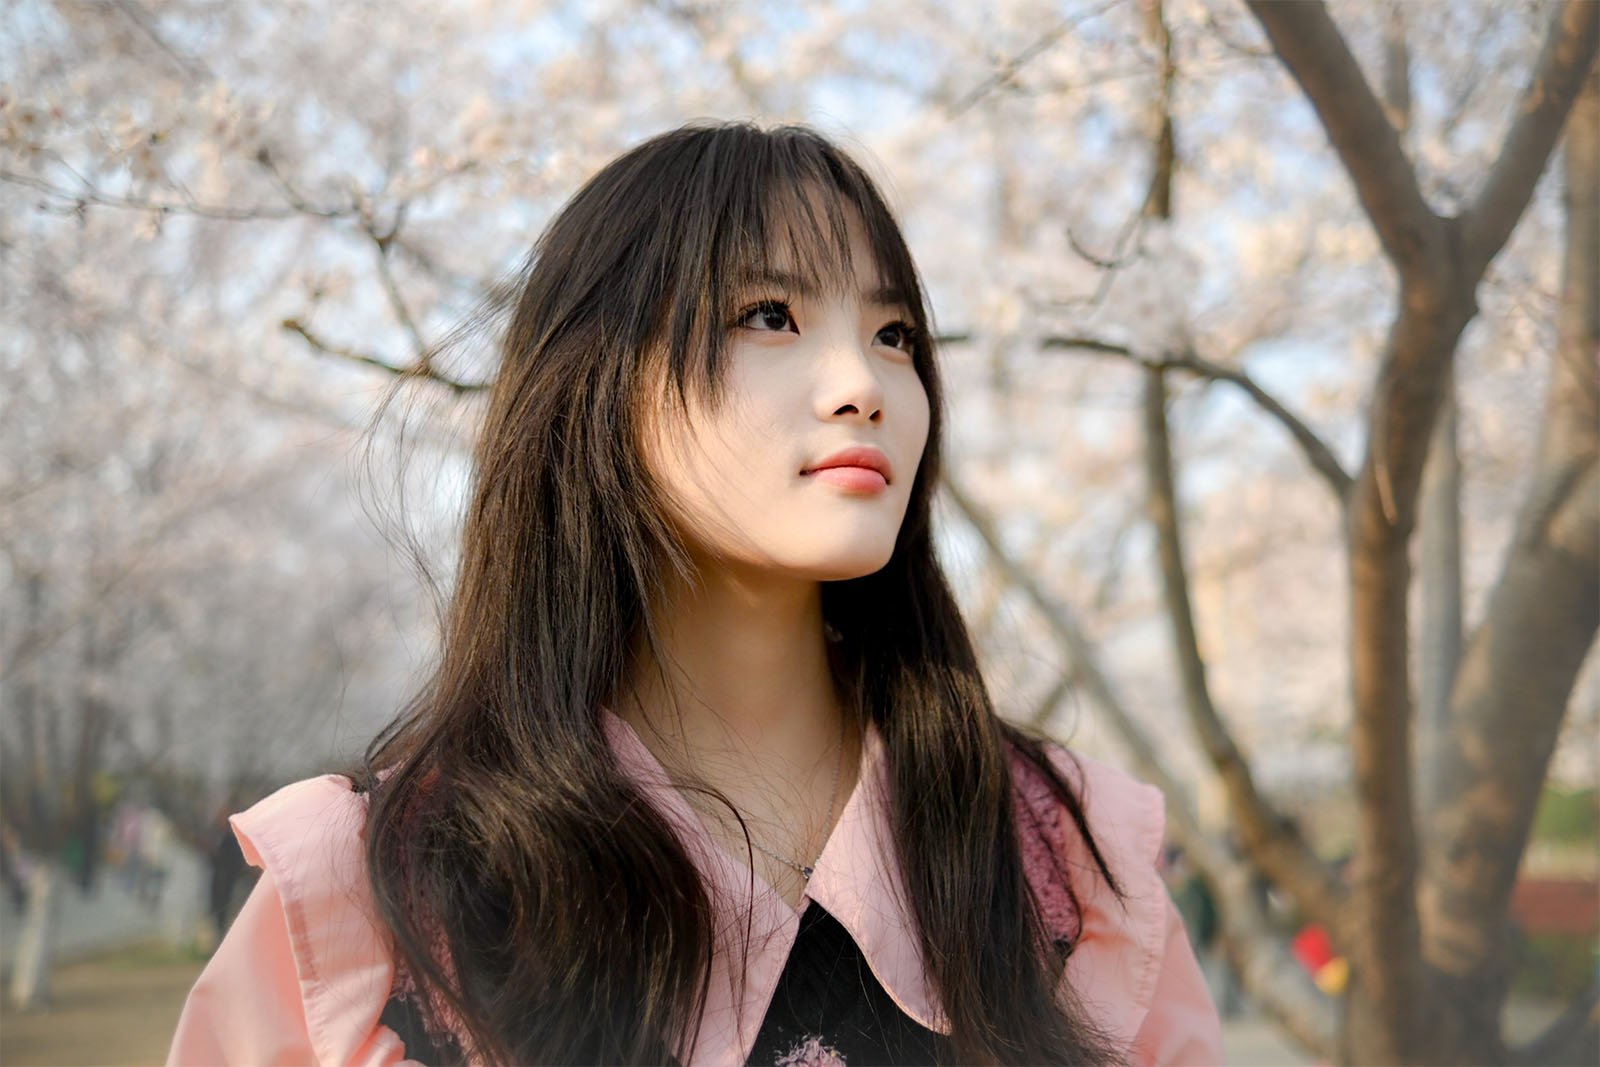 A young woman with long black hair, wearing a pink jacket, gazes thoughtfully to the side under a canopy of cherry blossoms.